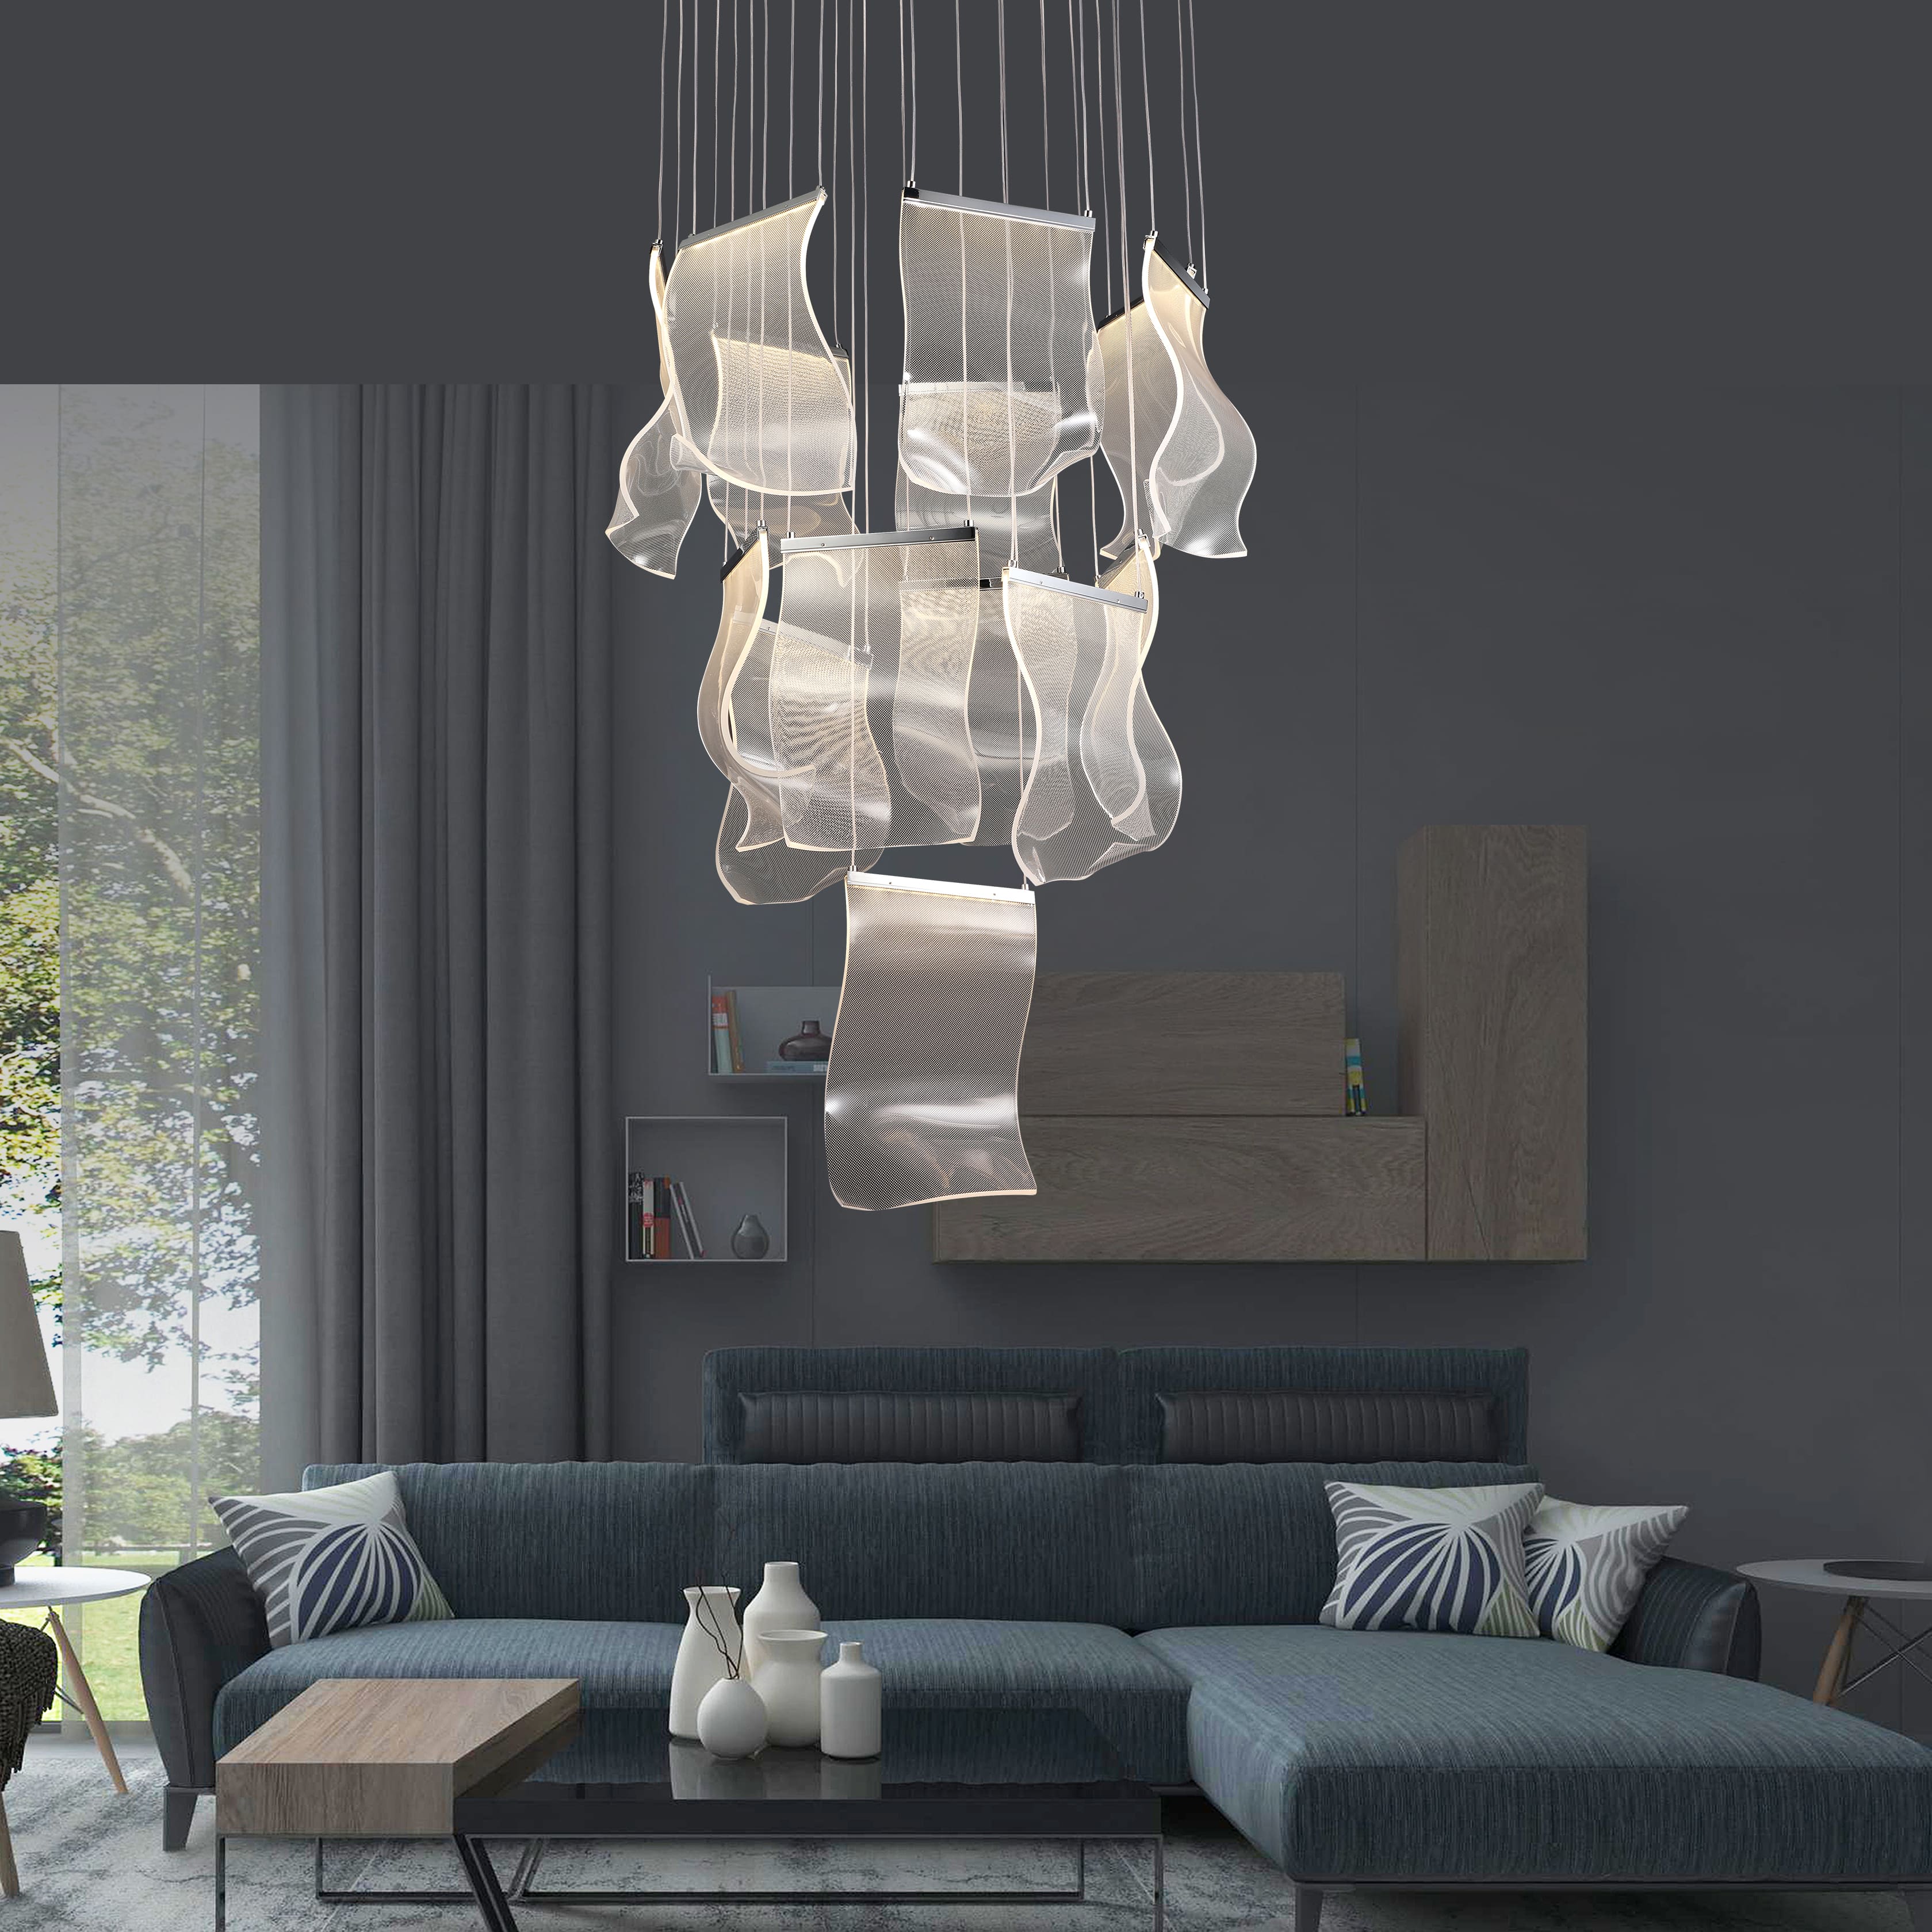 Our Abstract fourteen sheets LED Pendant Light chandelier will dazzle your eyes with its soft, gentle glow. Viva led miami , LIFE LED™  